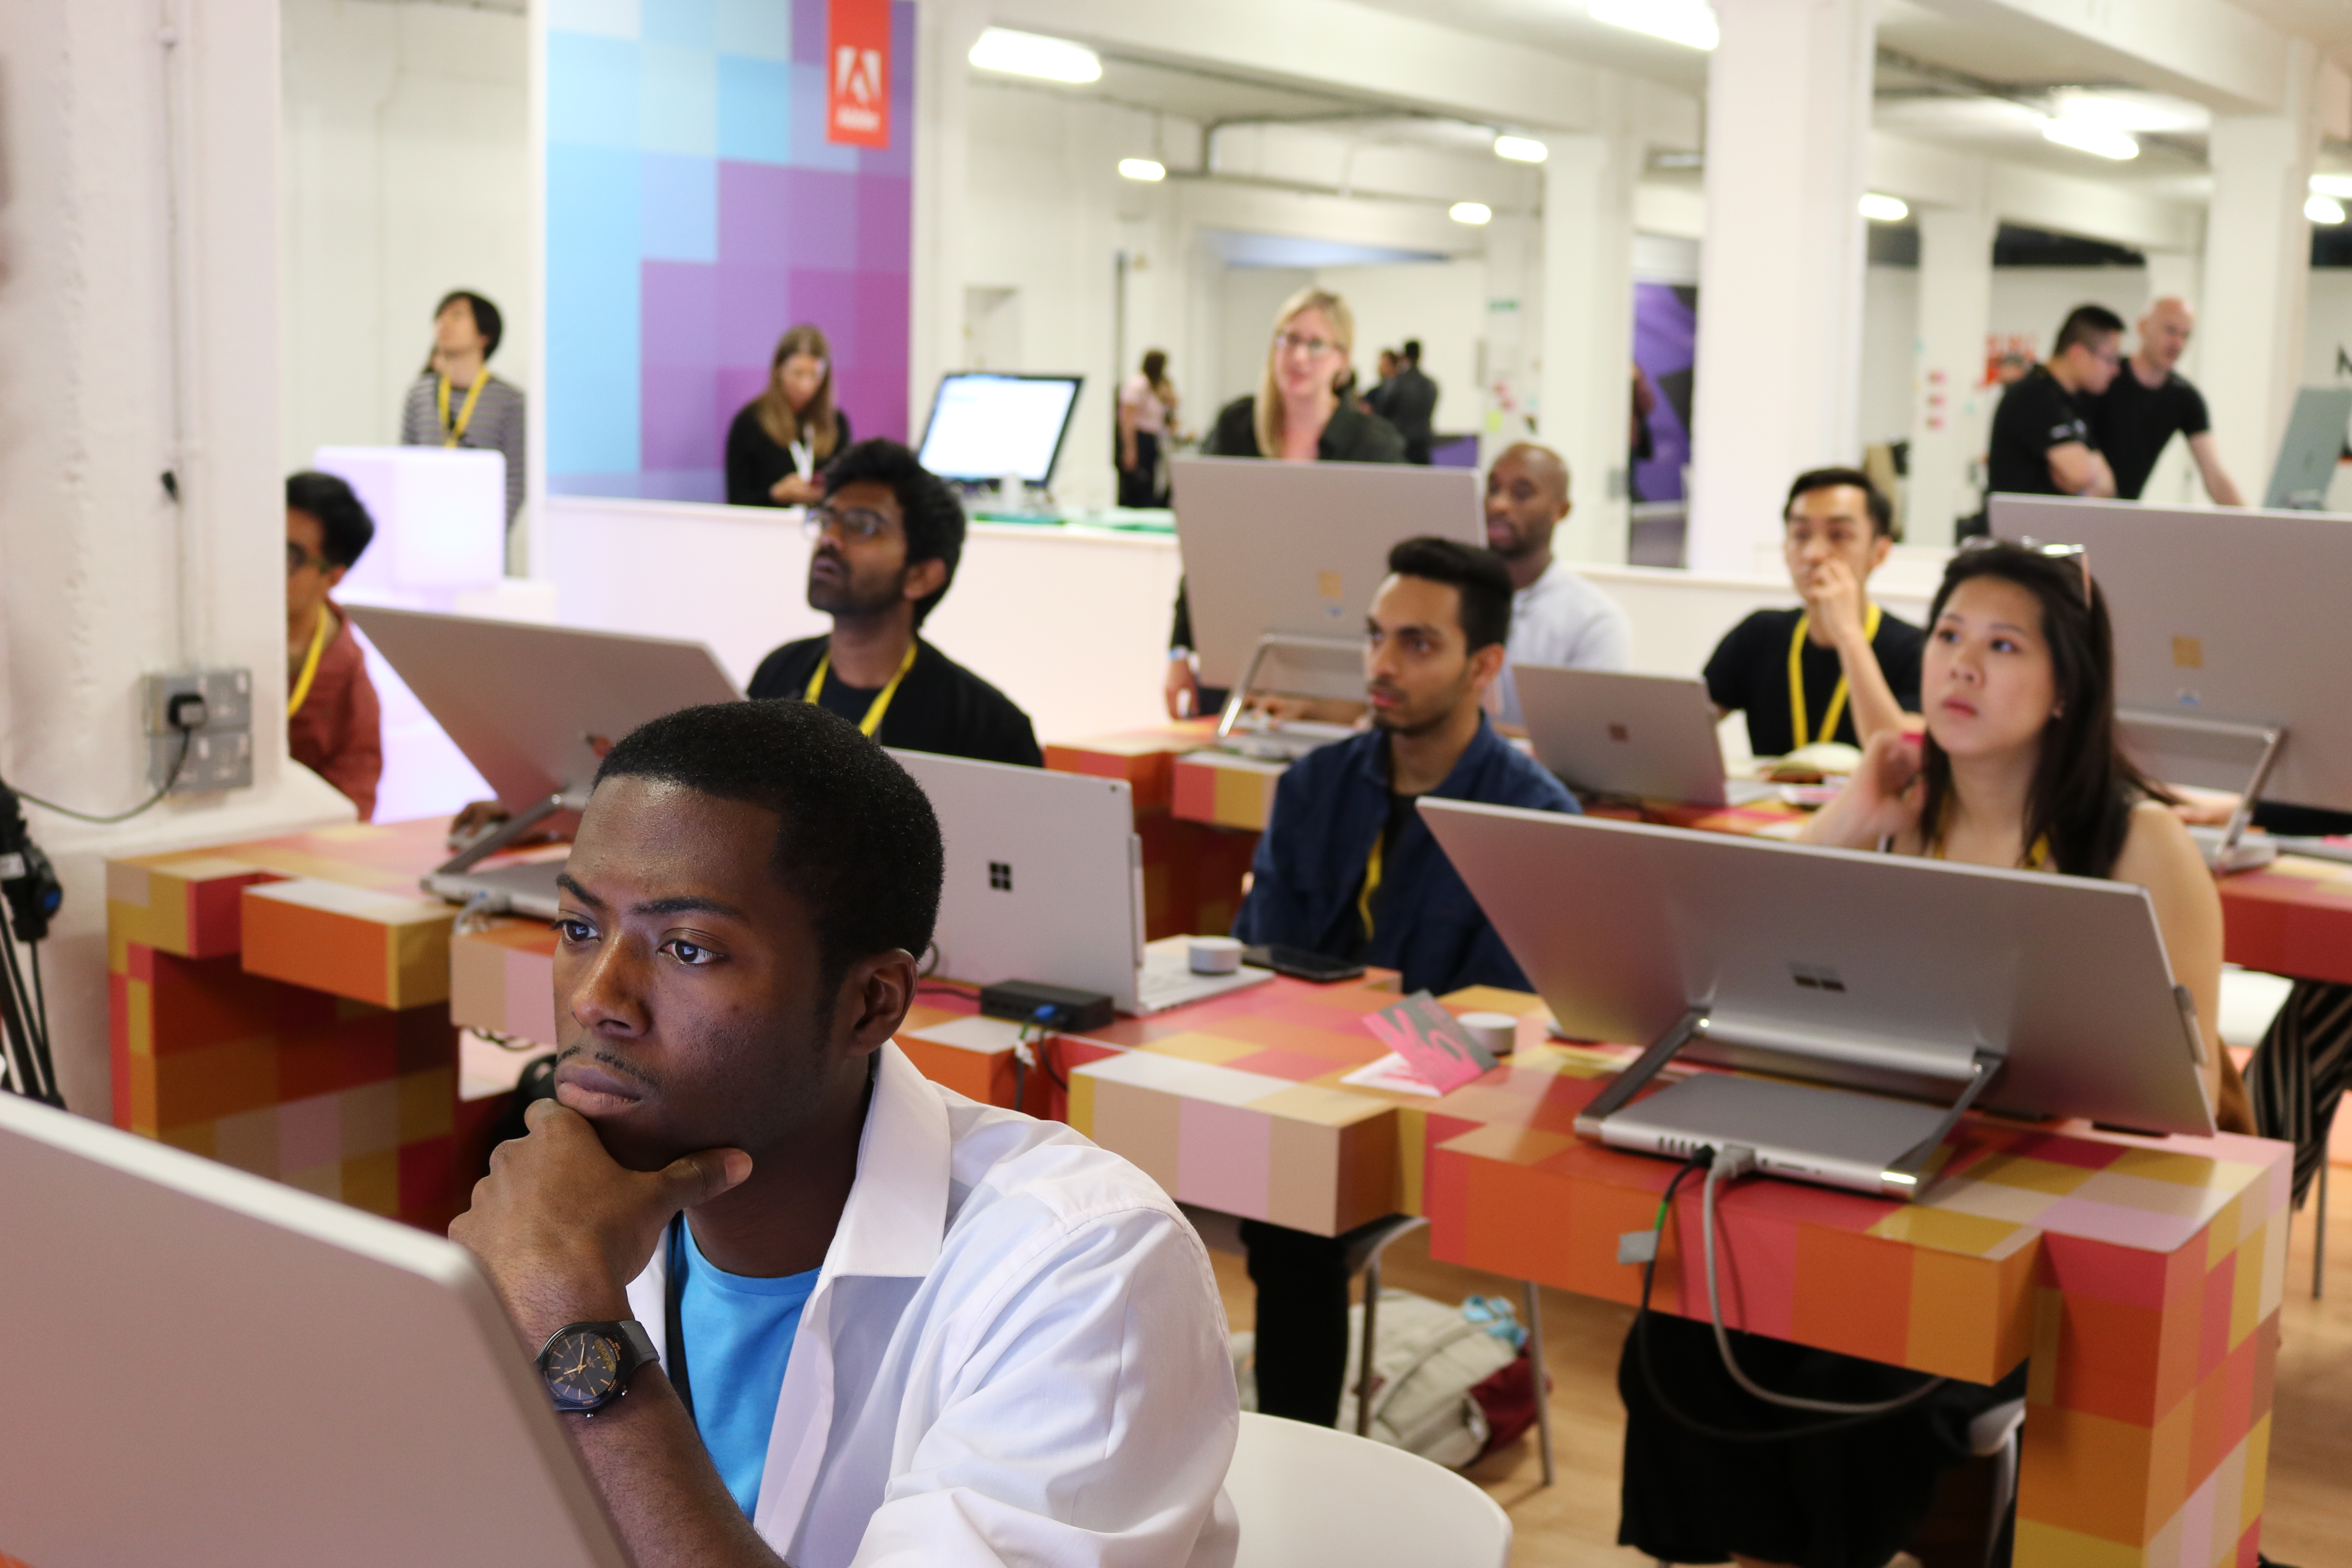 A group of people learn design techniques on Surface devices at D&AD